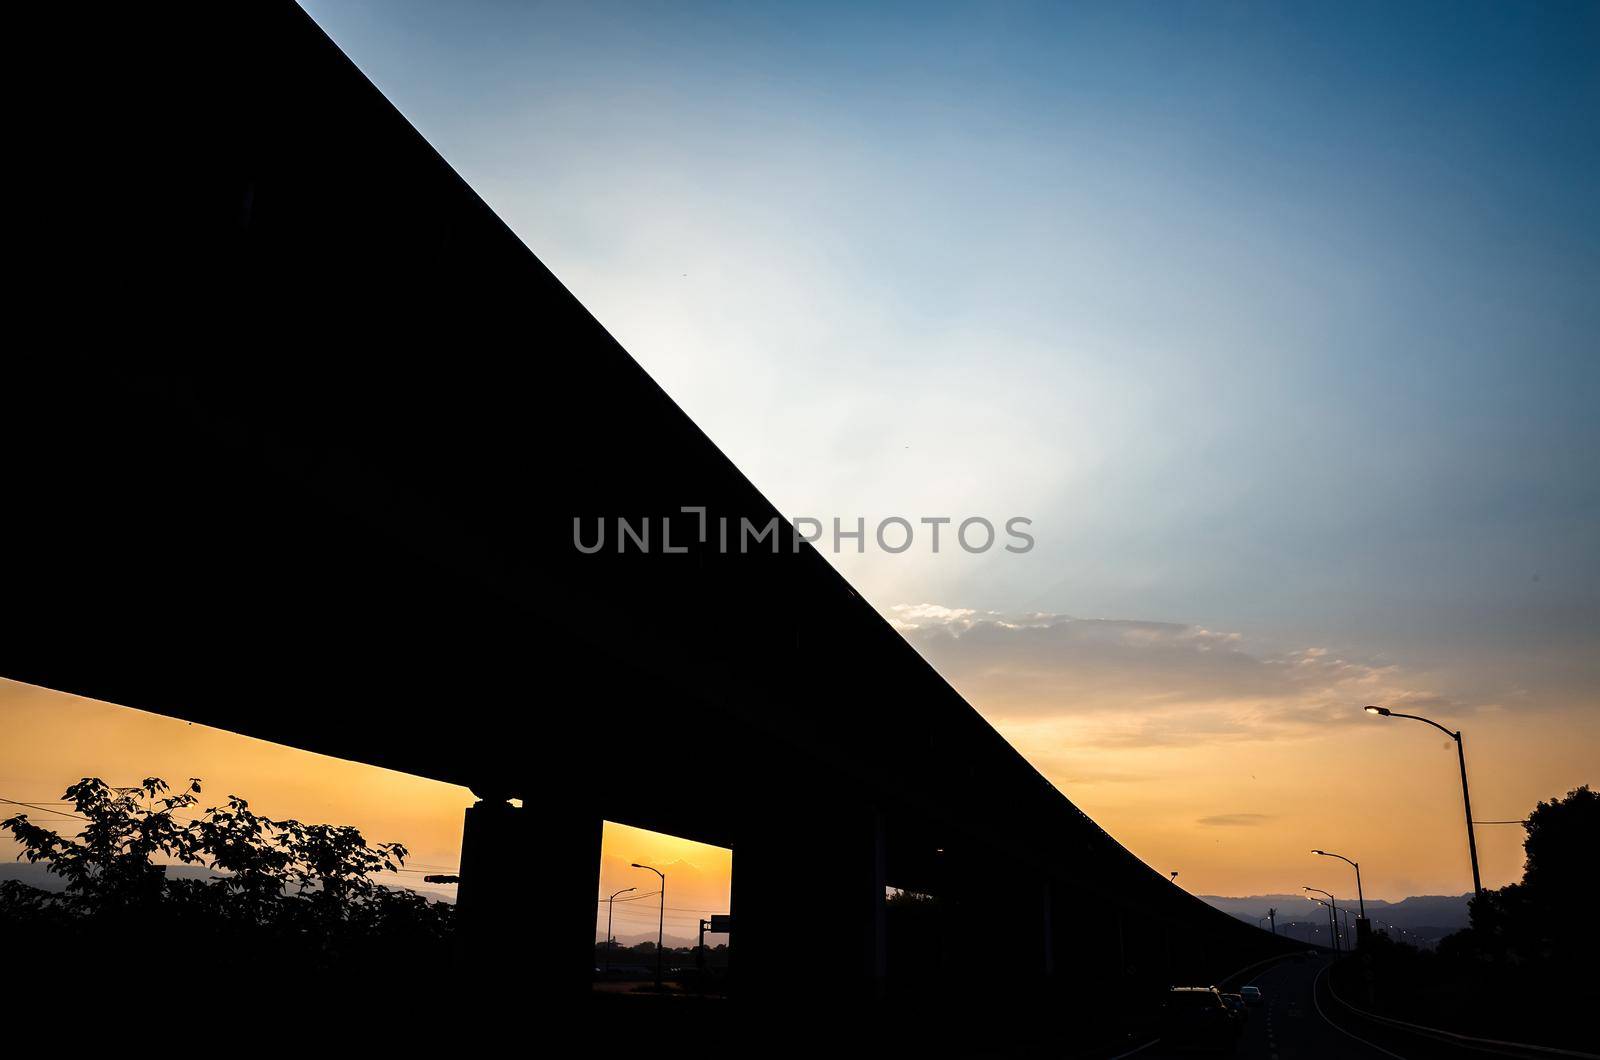 sunset scenery of highway bridge silhouette in the city